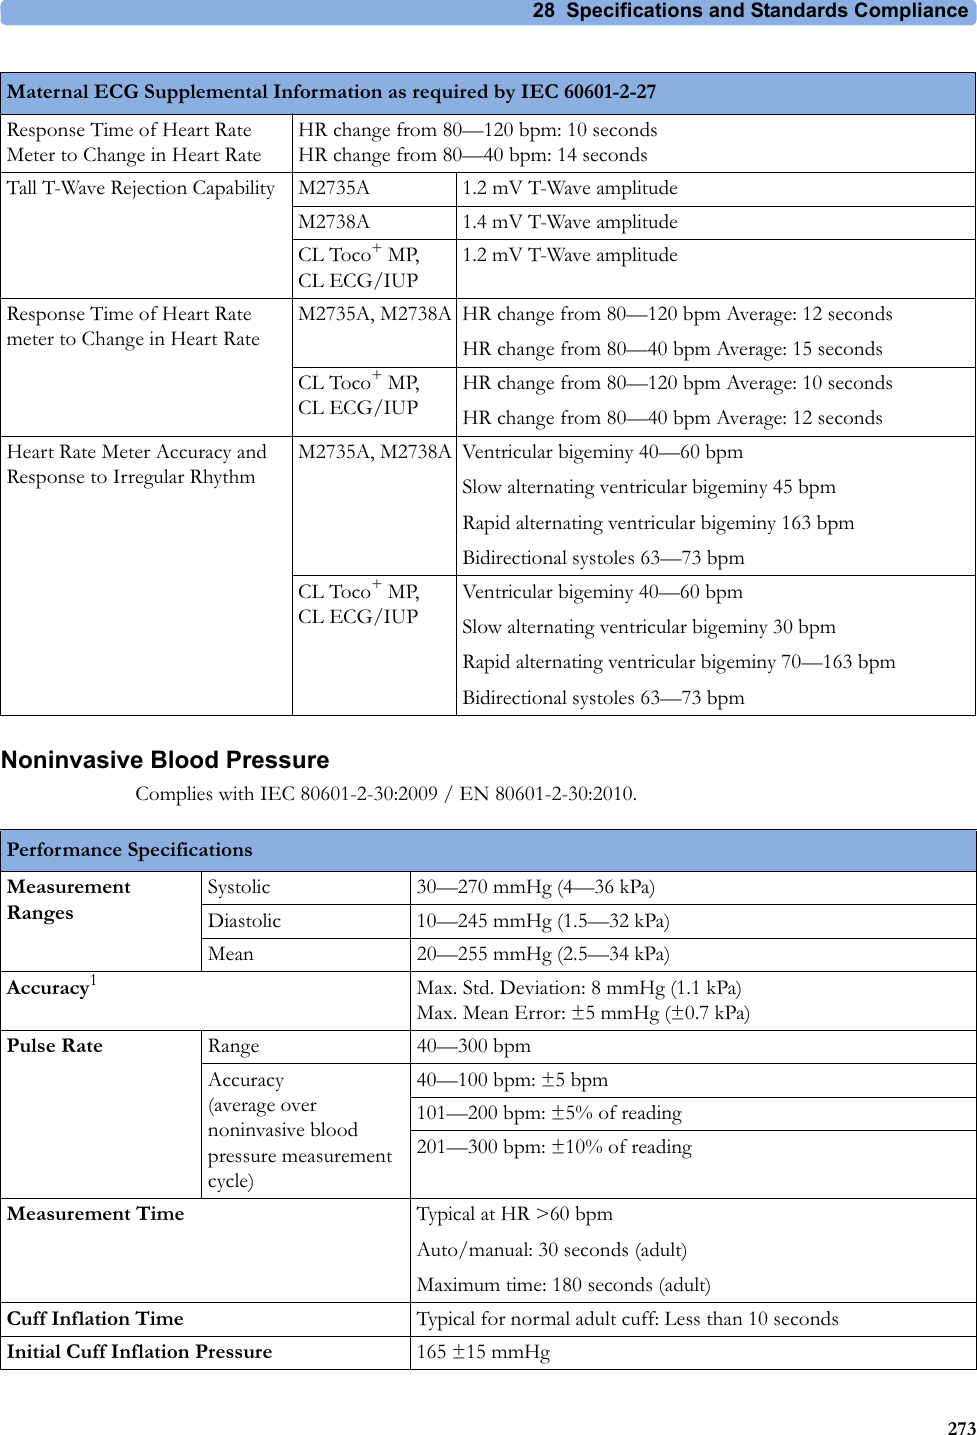 28  Specifications and Standards Compliance273Noninvasive Blood PressureComplies with IEC 80601-2-30:2009 / EN 80601-2-30:2010.Response Time of Heart Rate Meter to Change in Heart RateHR change from 80—120 bpm: 10 seconds HR change from 80—40 bpm: 14 secondsTall T-Wave Rejection Capability M2735A 1.2 mV T-Wave amplitudeM2738A 1.4 mV T-Wave amplitudeCL Toco+ MP, CL ECG/IUP1.2 mV T-Wave amplitudeResponse Time of Heart Rate meter to Change in Heart RateM2735A, M2738A HR change from 80—120 bpm Average: 12 secondsHR change from 80—40 bpm Average: 15 secondsCL Toco+ MP, CL ECG/IUPHR change from 80—120 bpm Average: 10 secondsHR change from 80—40 bpm Average: 12 secondsHeart Rate Meter Accuracy and Response to Irregular RhythmM2735A, M2738A Ventricular bigeminy 40—60 bpmSlow alternating ventricular bigeminy 45 bpmRapid alternating ventricular bigeminy 163 bpmBidirectional systoles 63—73 bpmCL Toco+ MP, CL ECG/IUPVentricular bigeminy 40—60 bpmSlow alternating ventricular bigeminy 30 bpmRapid alternating ventricular bigeminy 70—163 bpmBidirectional systoles 63—73 bpmMaternal ECG Supplemental Information as required by IEC 60601-2-27Performance Specifications Measurement RangesSystolic 30—270 mmHg (4—36 kPa)Diastolic 10—245 mmHg (1.5—32 kPa)Mean 20—255 mmHg (2.5—34 kPa)Accuracy1Max. Std. Deviation: 8 mmHg (1.1 kPa) Max. Mean Error: ±5 mmHg (±0.7 kPa)Pulse Rate Range 40—300 bpmAccuracy (average over noninvasive blood pressure measurement cycle)40—100 bpm: ±5 bpm101—200 bpm: ±5% of reading201—300 bpm: ±10% of readingMeasurement Time Typical at HR &gt;60 bpmAuto/manual: 30 seconds (adult)Maximum time: 180 seconds (adult)Cuff Inflation Time Typical for normal adult cuff: Less than 10 secondsInitial Cuff Inflation Pressure 165 ±15 mmHg